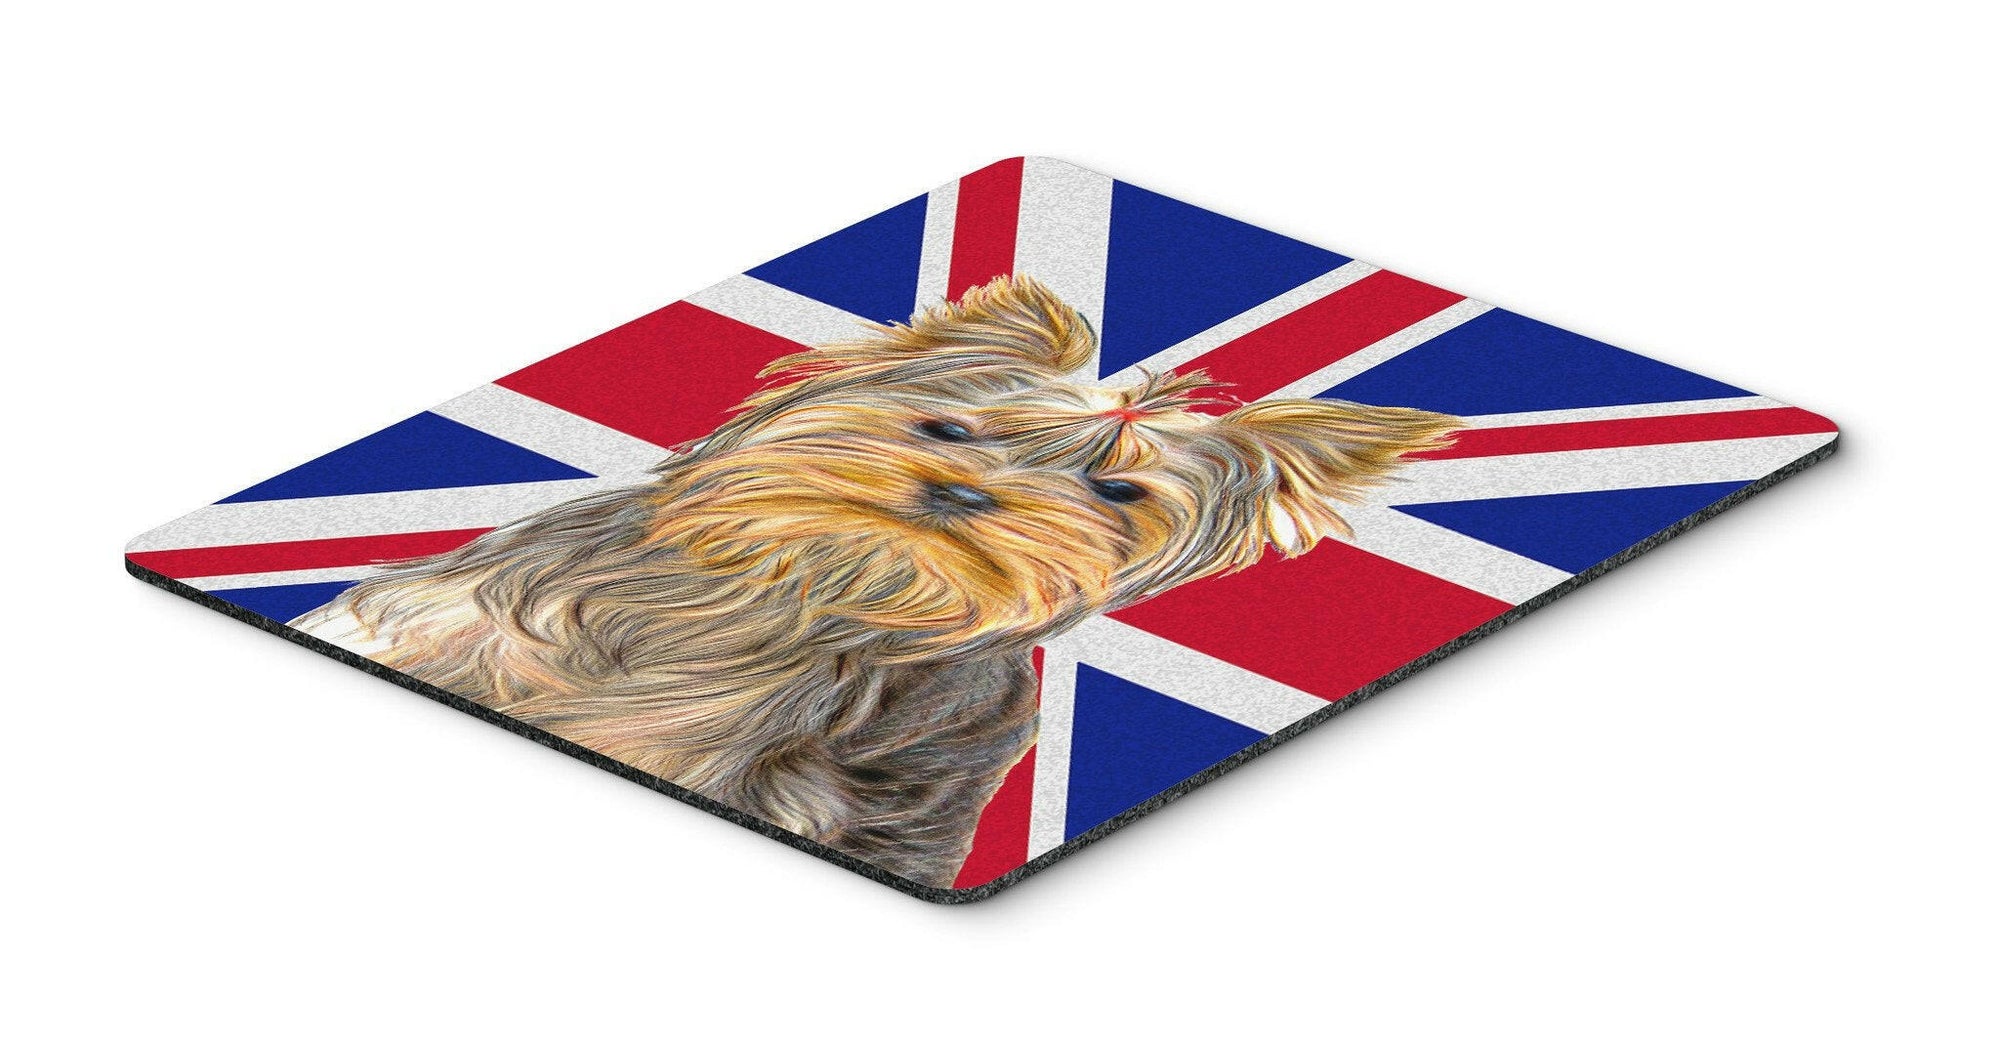 Yorkie / Yorkshire Terrier with English Union Jack British Flag Mouse Pad, Hot Pad or Trivet KJ1163MP by Caroline's Treasures